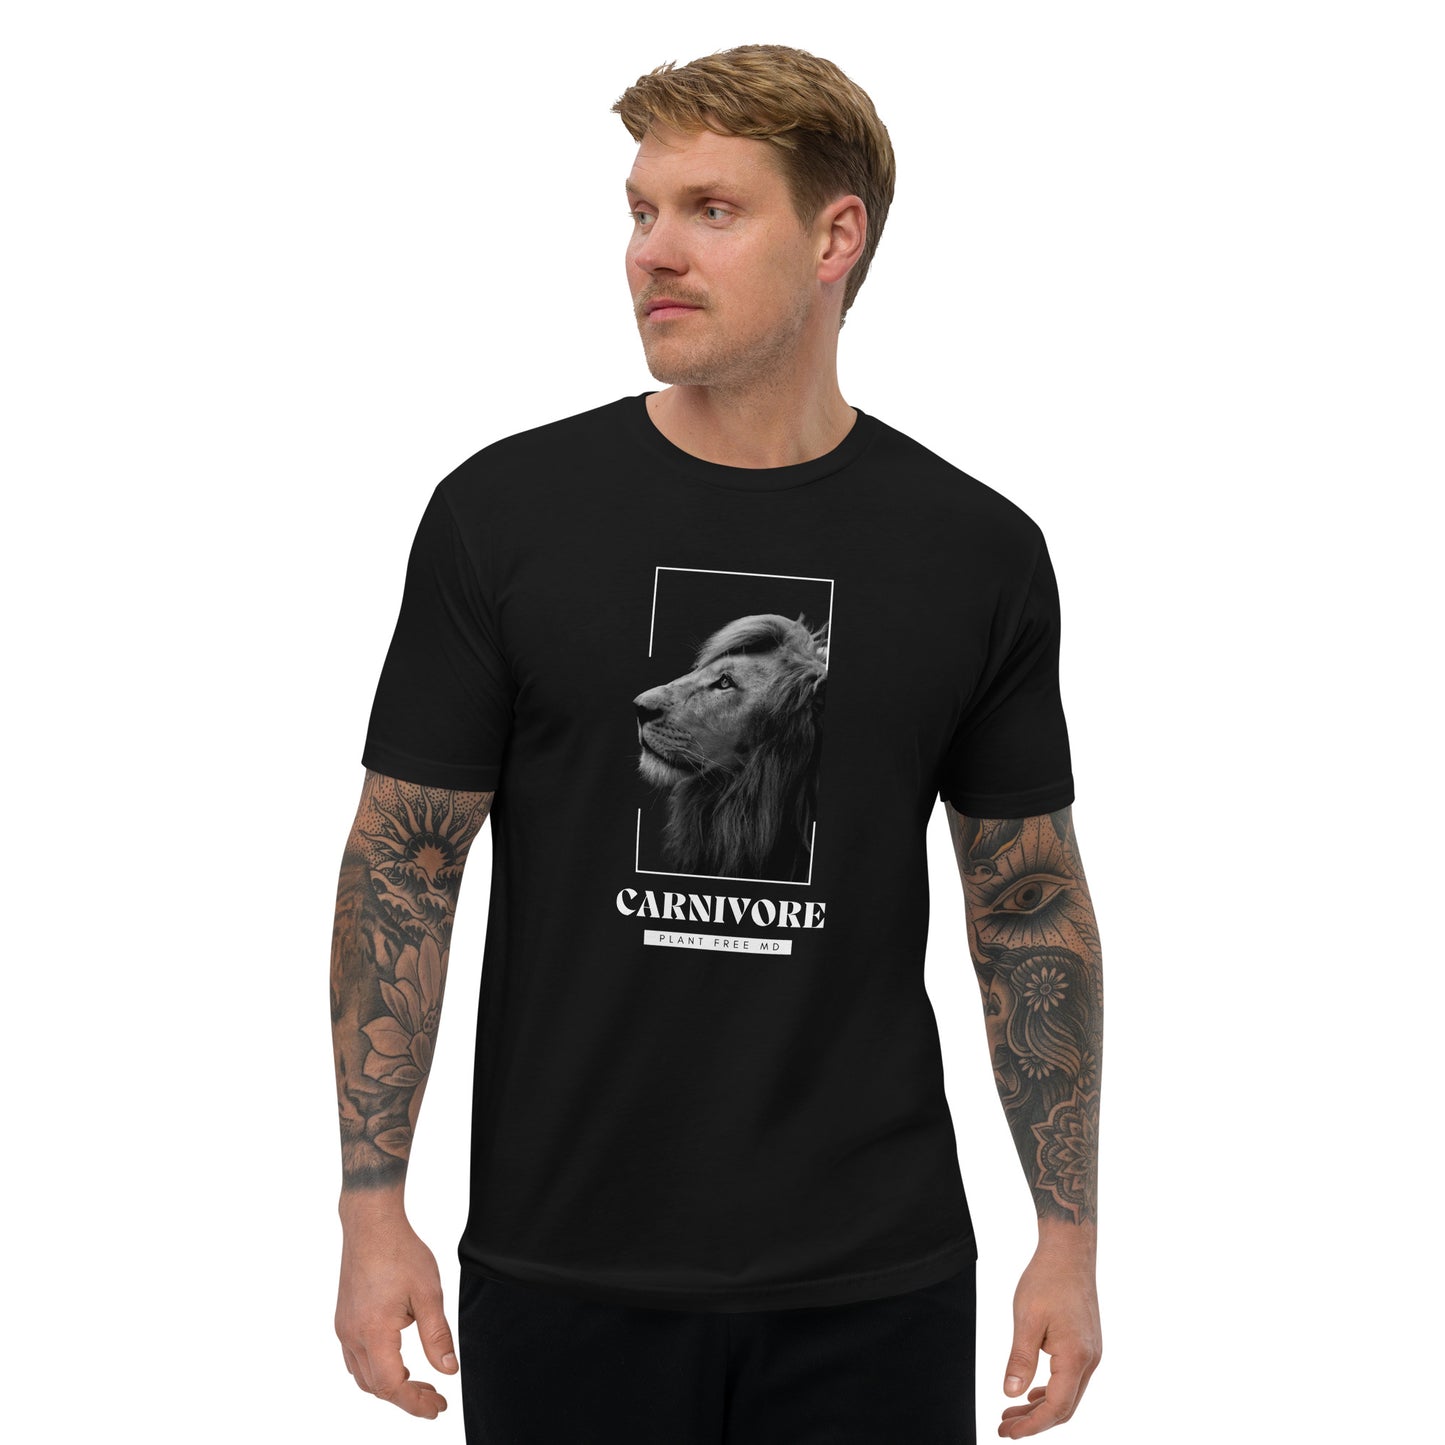 King Lion Carnivore Men's Fitted T-shirt